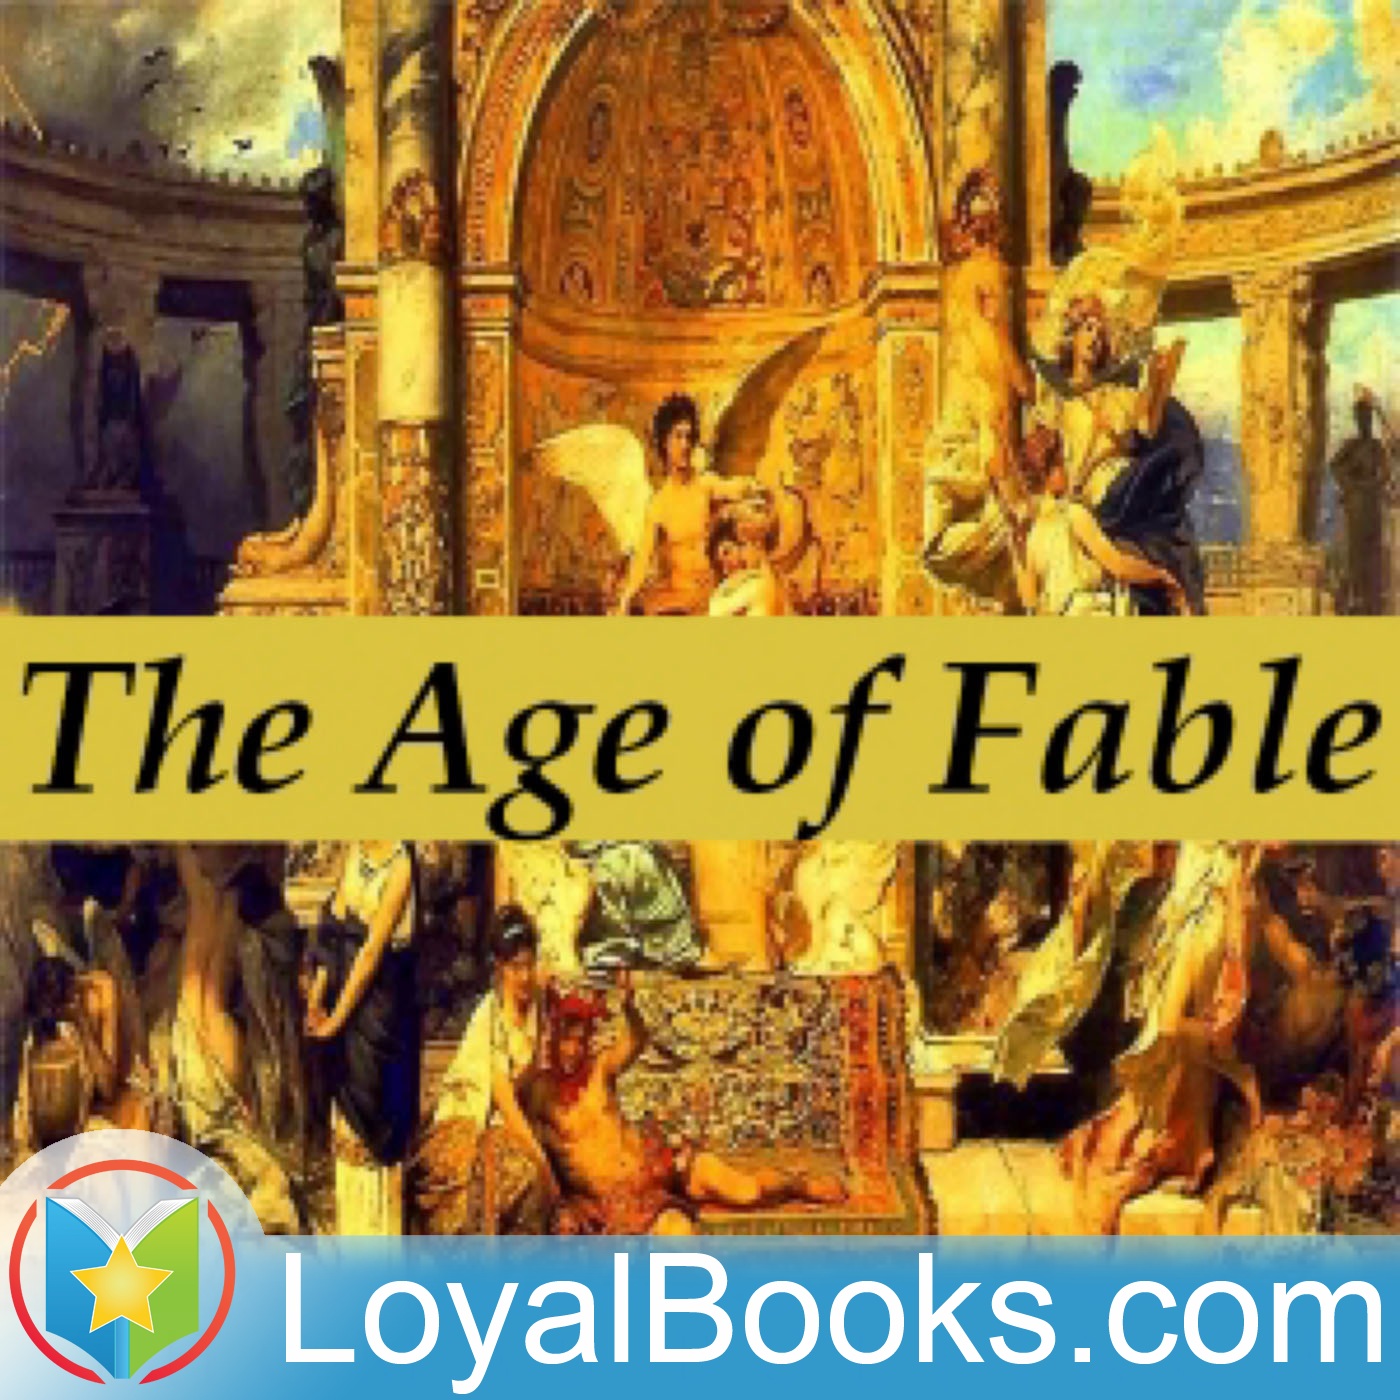 The Age of Fable: Chapter 03